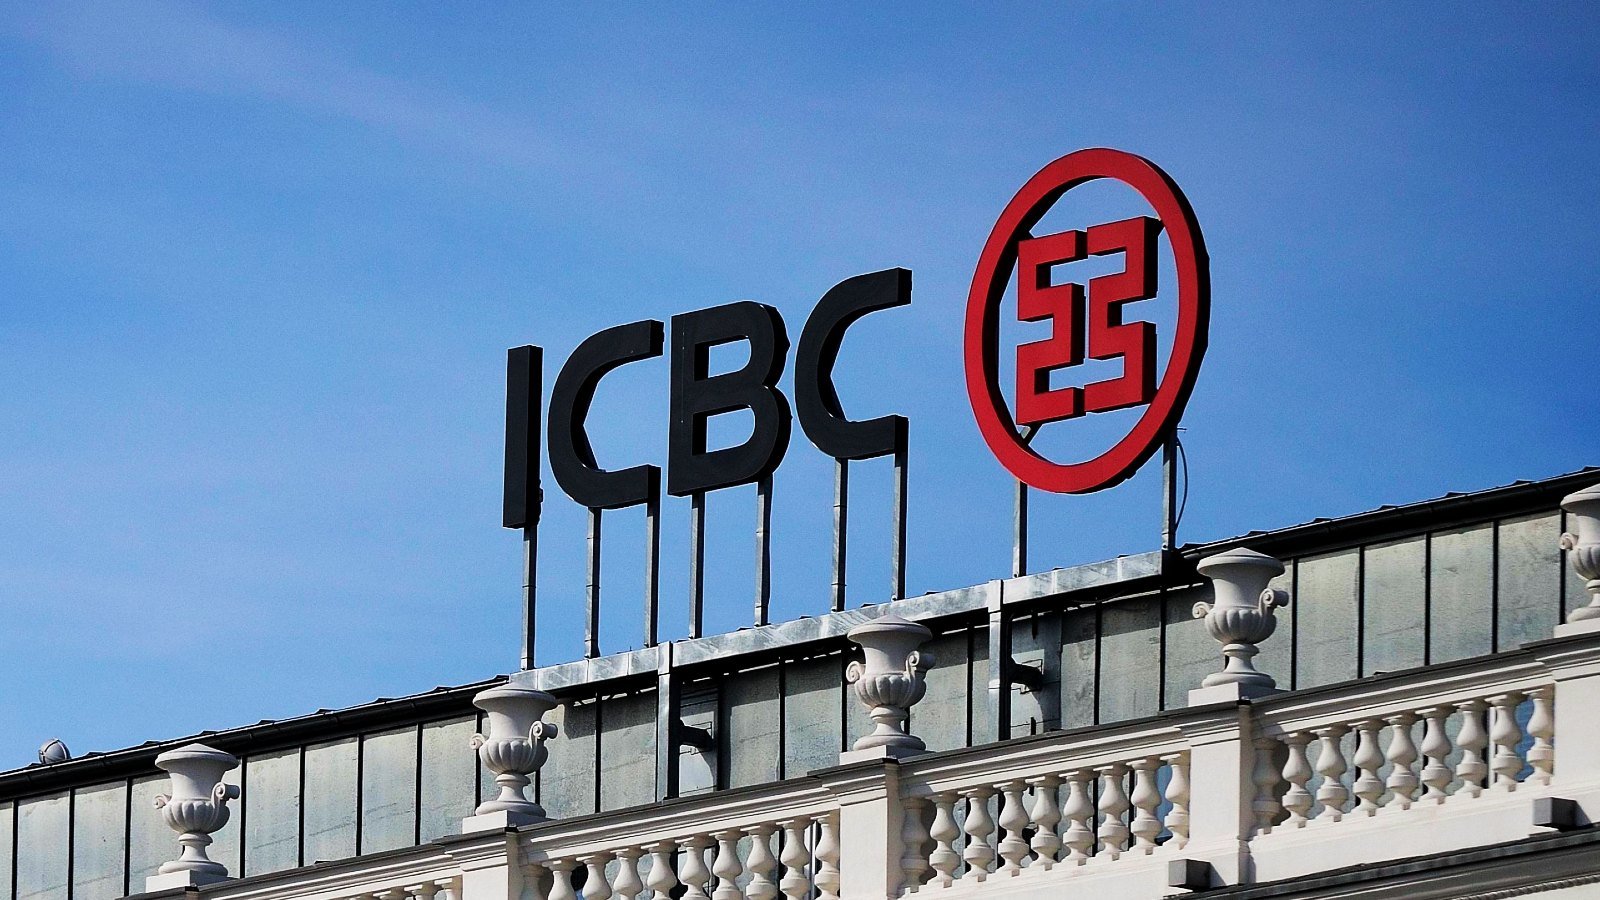 World’s largest commercial bank ICBC confirms ransomware attack